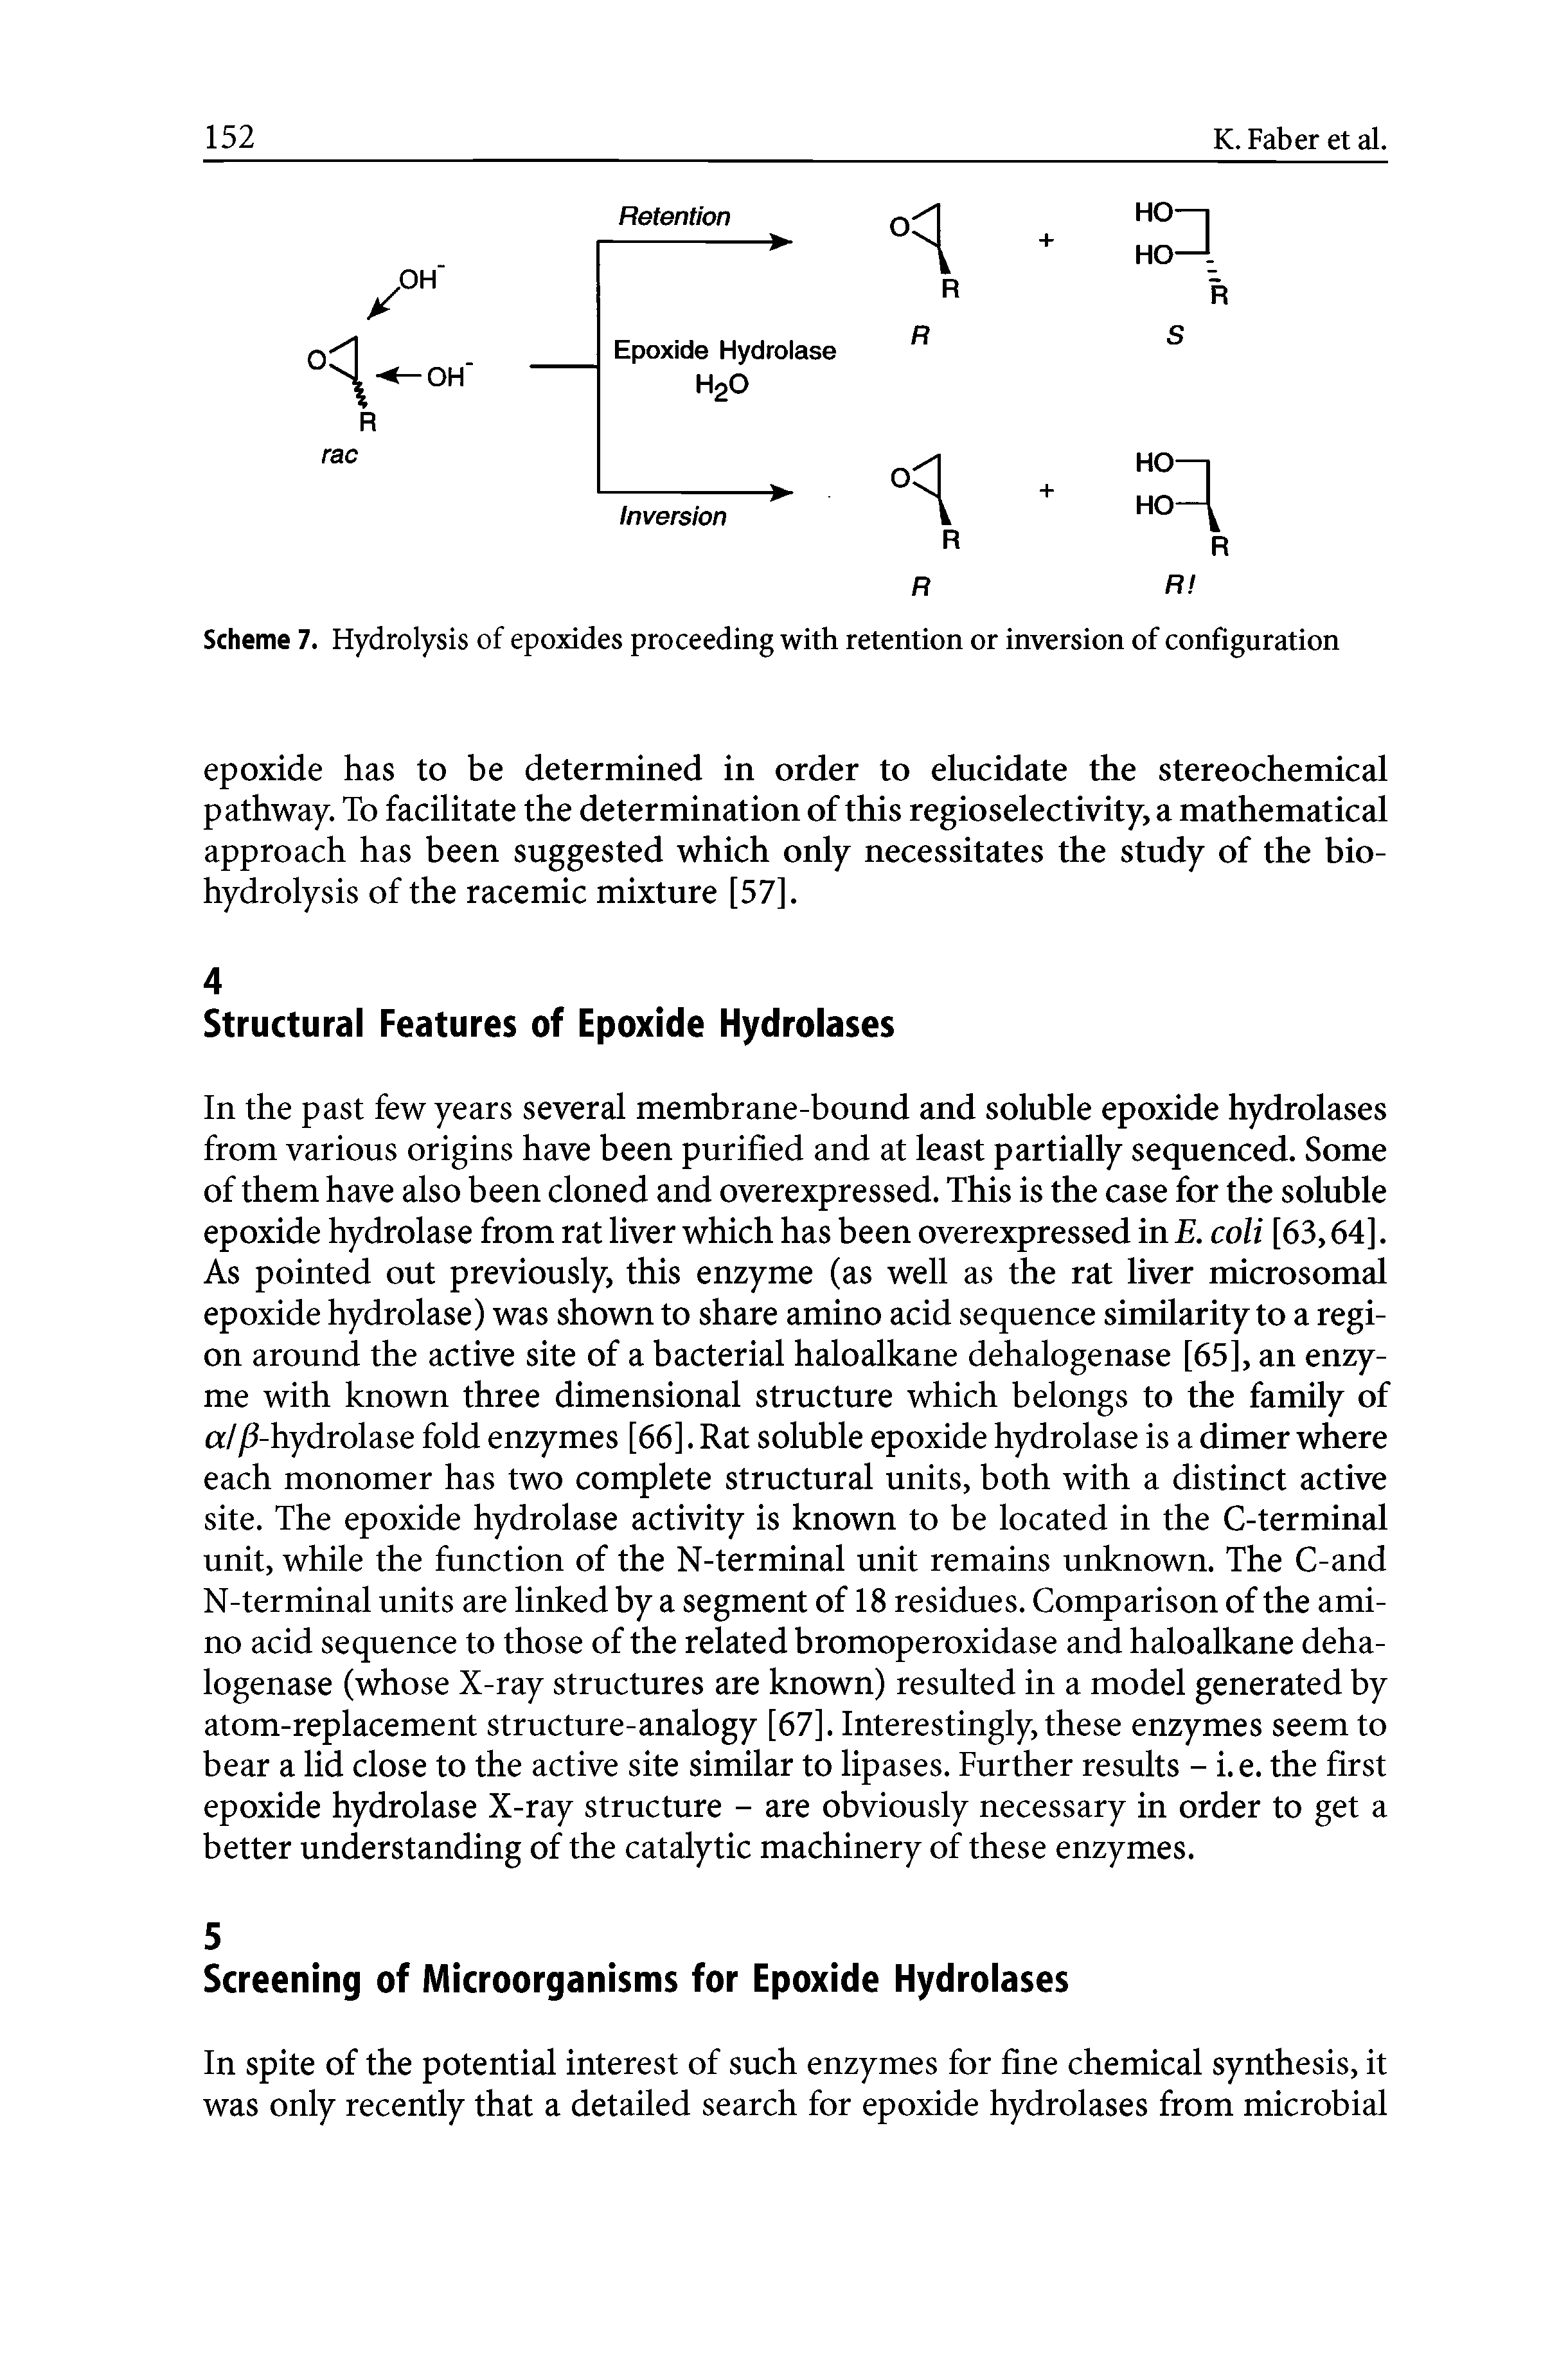 Scheme 7. Hydrolysis of epoxides proceeding with retention or inversion of configuration...